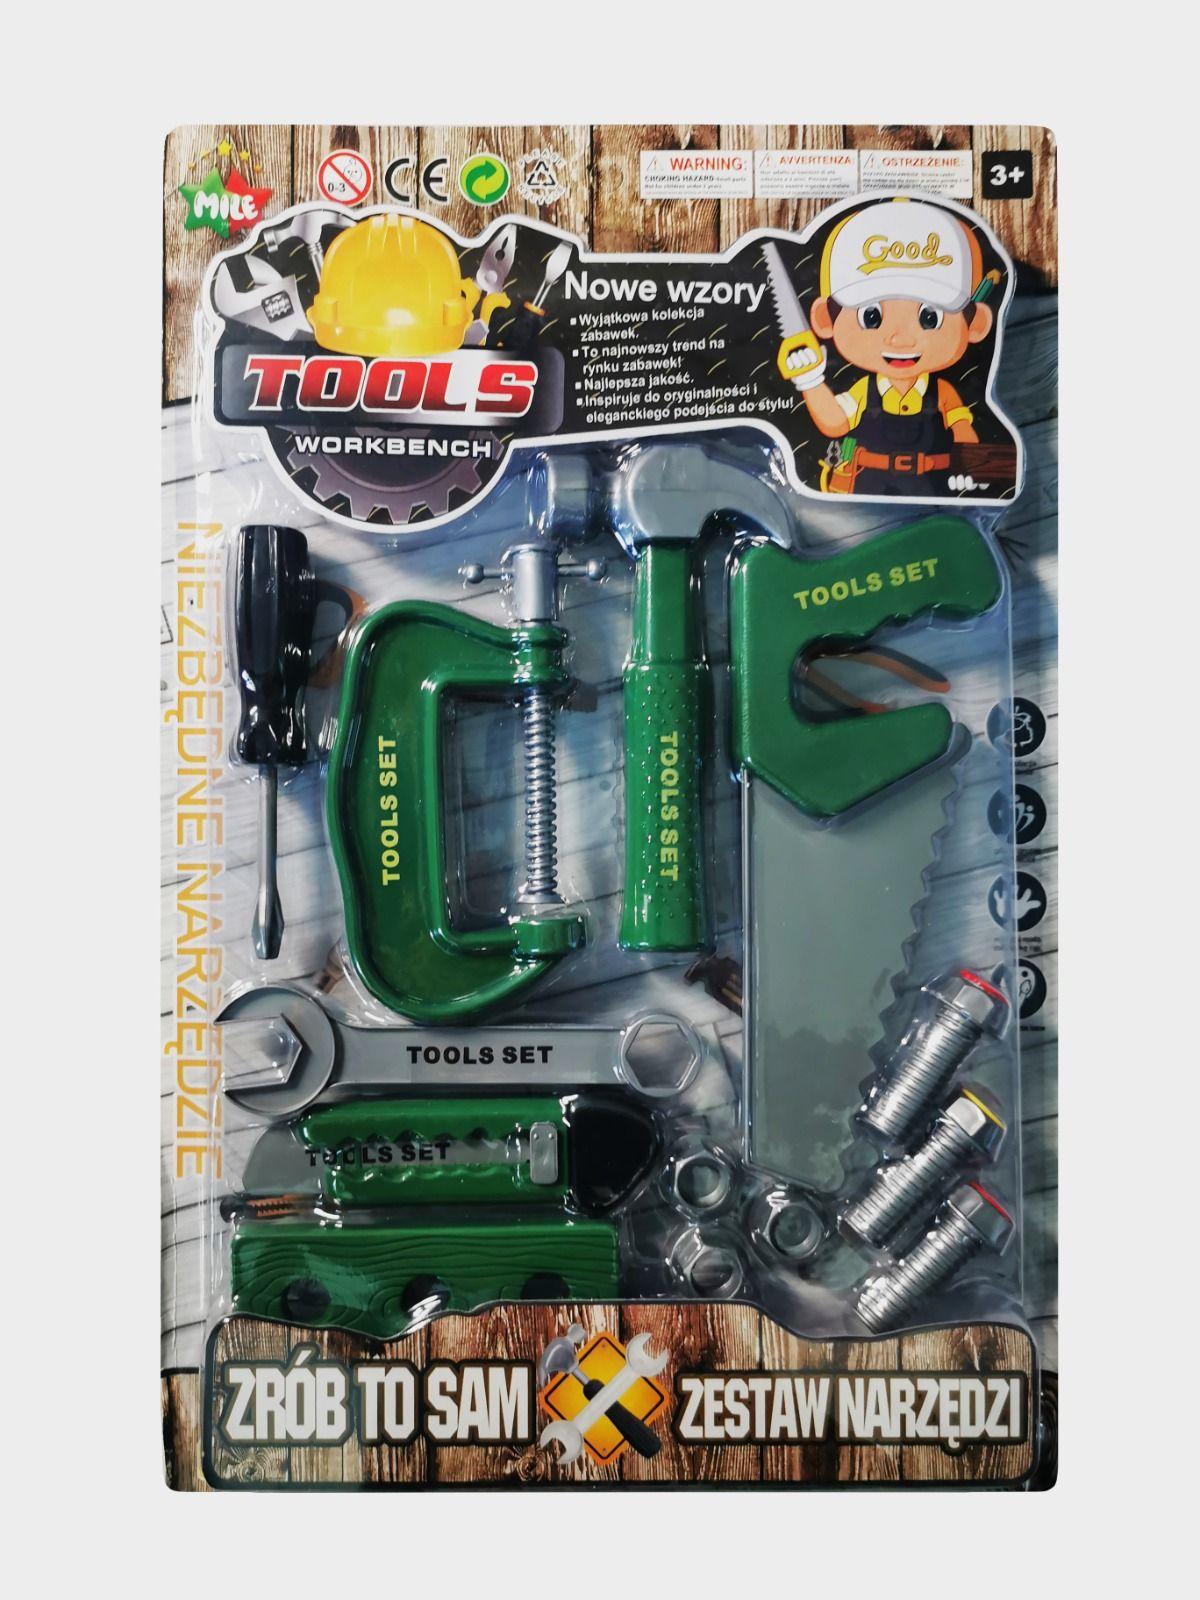 A toy set of tools for a boy